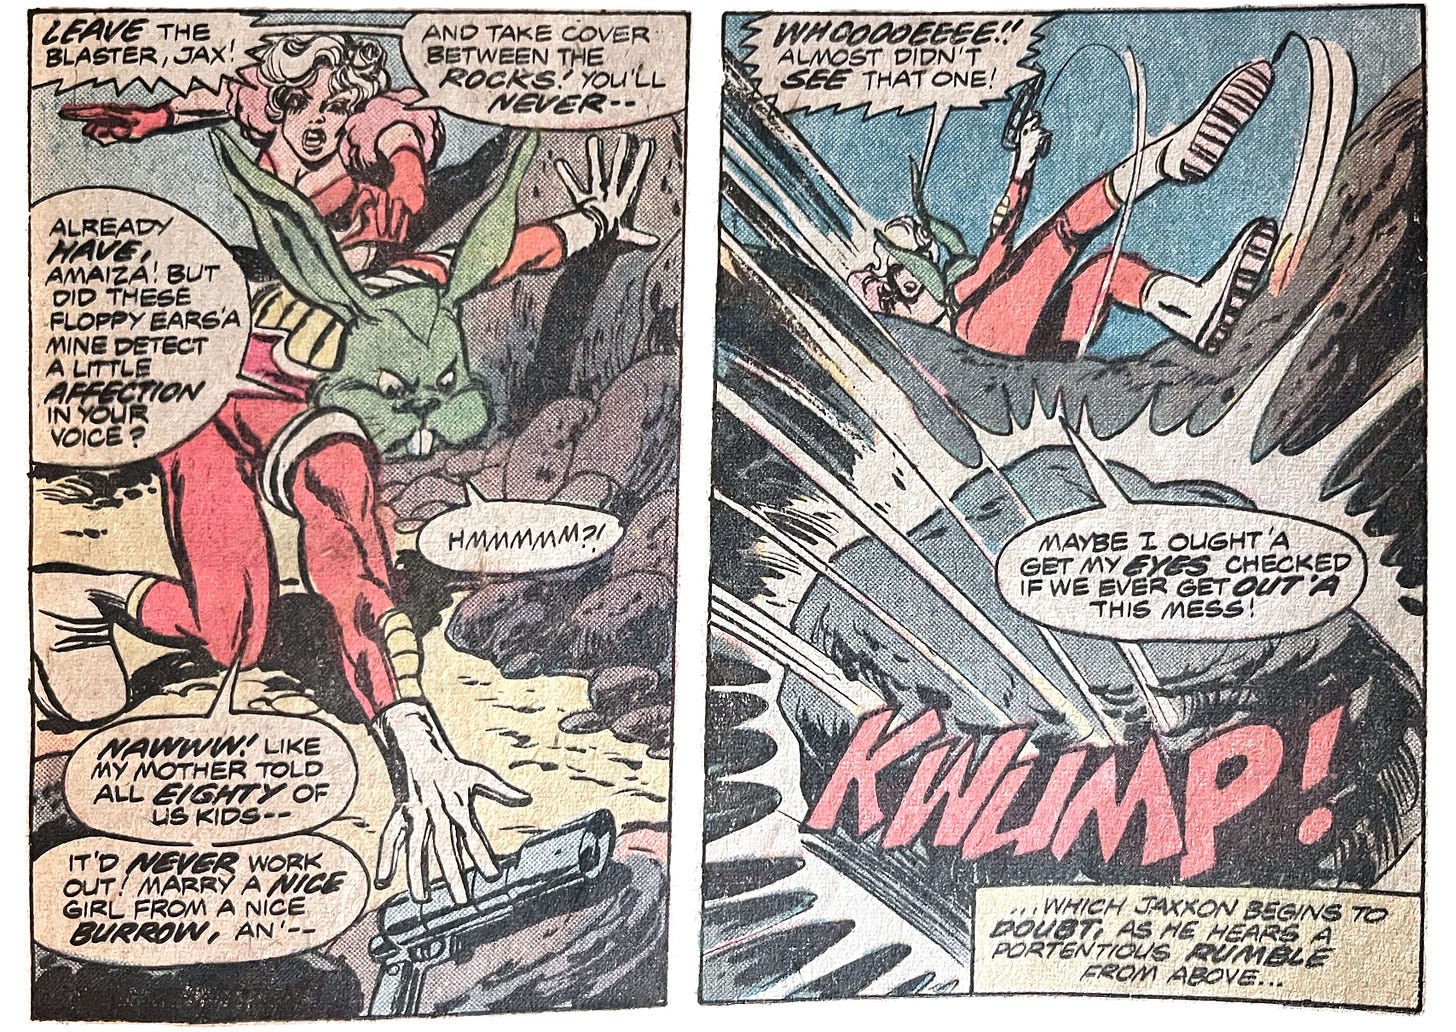 Two panels from this issue showing Jaxxon (who looks like a man with a big green rabbit head) and Amaiza (who is a white-haired woman). In the first panel, Jaxxon is reaching for a pistol. Amaiza says, “Leave the blaster, Jax! And take cover between the rocks! You’ll never —” Jaxxon says, “Already have, Amaiza! But did these floppy ears’a mine detect a little affection in your voice? Hmmmmm?! Nawww! Like my mother told all eighty of us kids — it’d never work out! Marry a nice girl from a nice burrow, an’ —” In the second panel, Amaiza grabs Jaxxon and pulls him out of the way before a large rock falls on him. Jaxxon says, “Whooooeeee!! Almost didn’t see that one! Maybe I ought’a get my eyes checked out if we ever get out’a this mess!” The rock hits the ground with a “Kwump!” sound effect. Narration at the bottom of the panel states, “… which Jaxxon begins to doubt, as he hears a portentous rumble from above…”